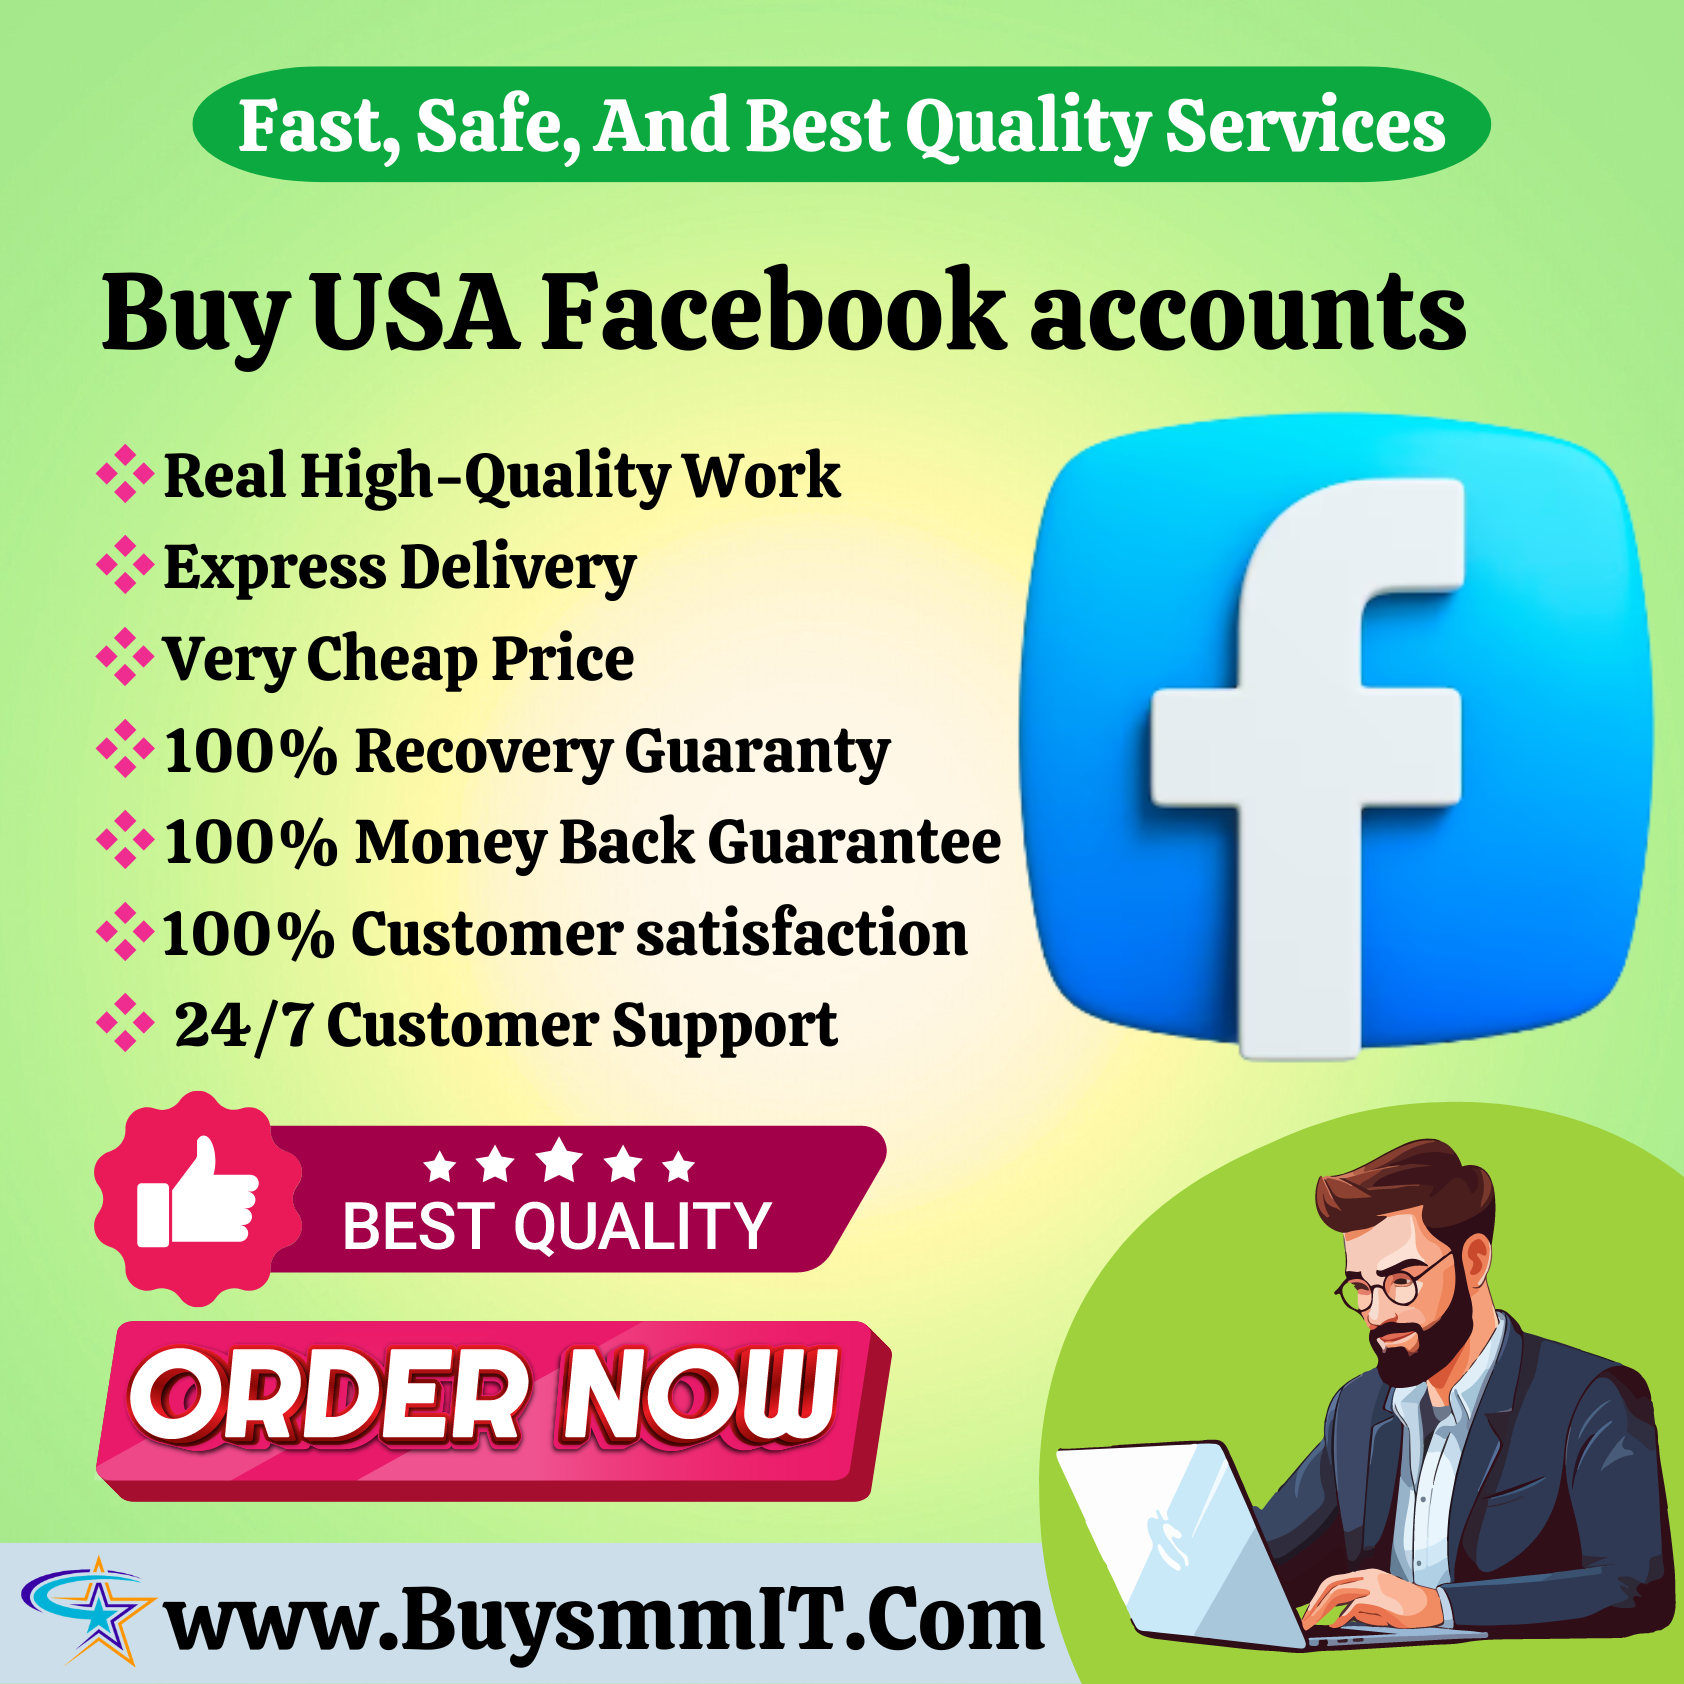 Buy USA Facebook Accounts - 100% Safe And Verified